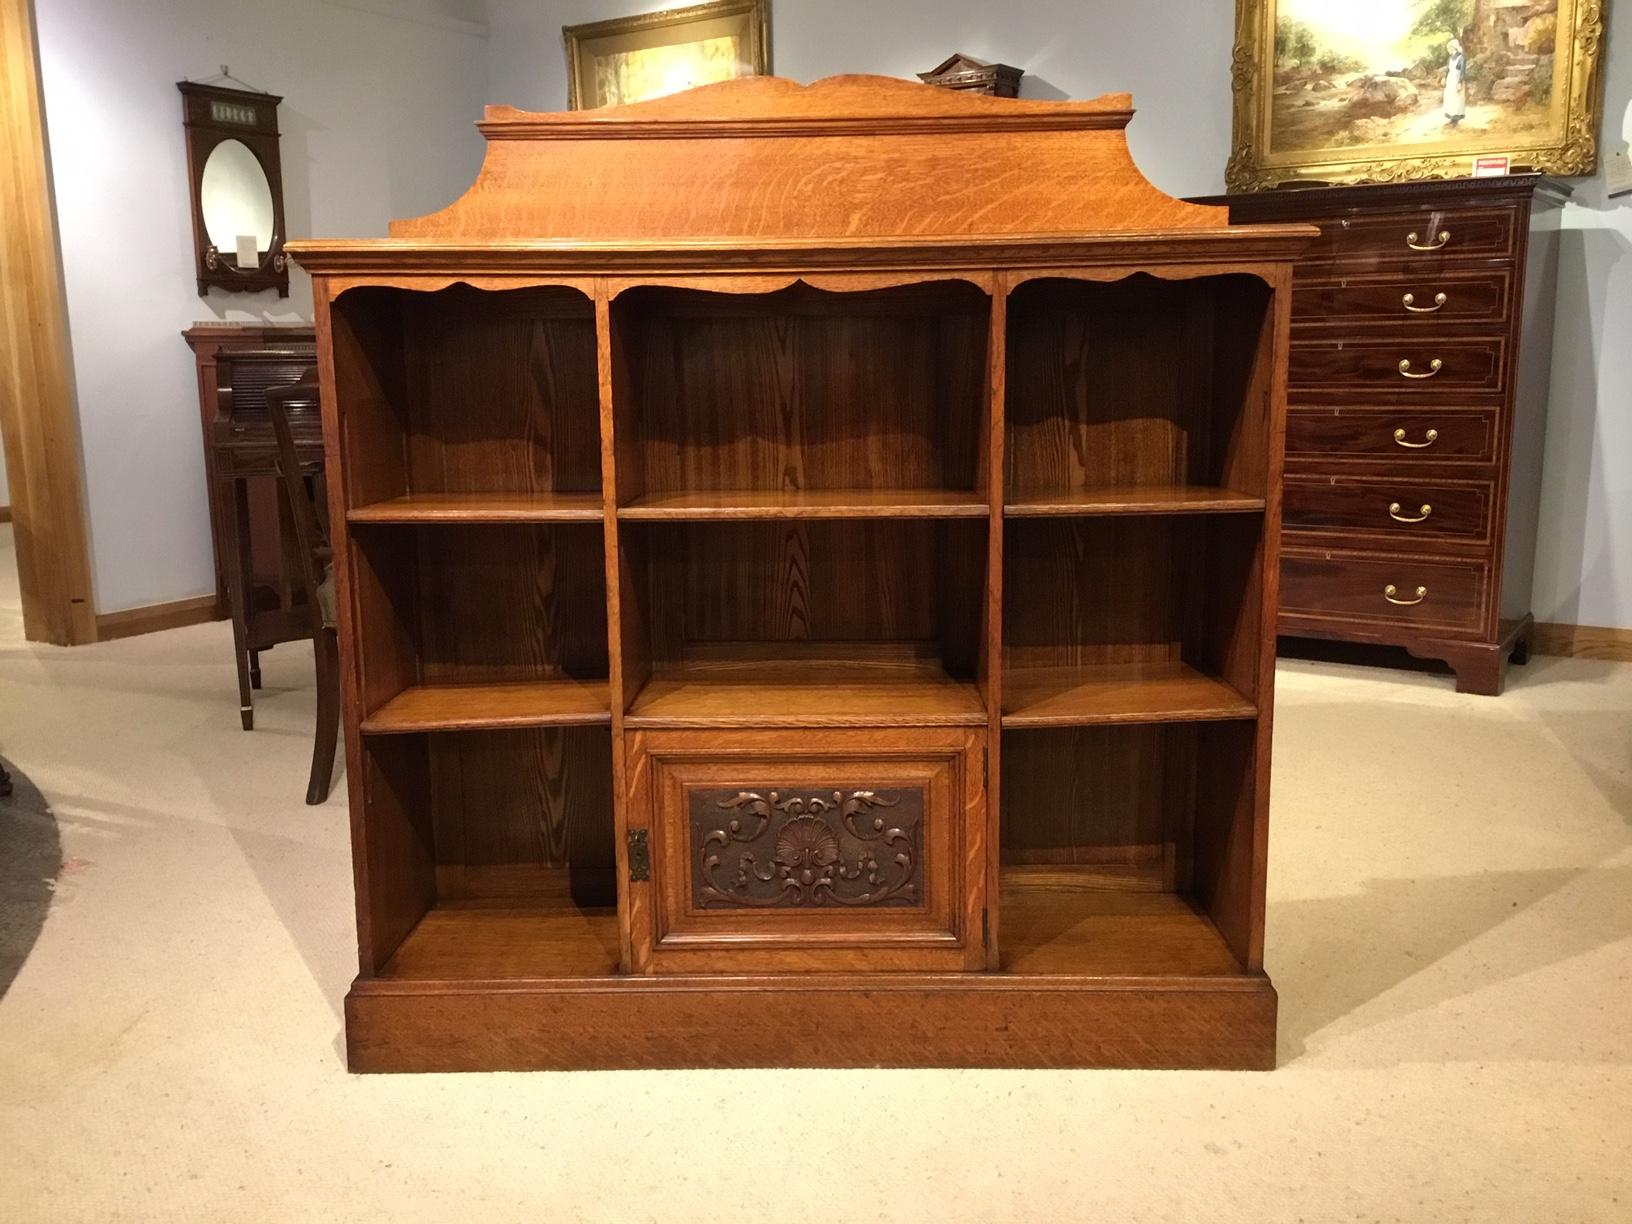 An oak late Victorian period open bookcase. Constructed throughout using the finest quarter sawn oak with beautiful medullary rays. The raised galleried back above a solid rectangular oak top and with five adjustable oak shelves and hinged cupboard